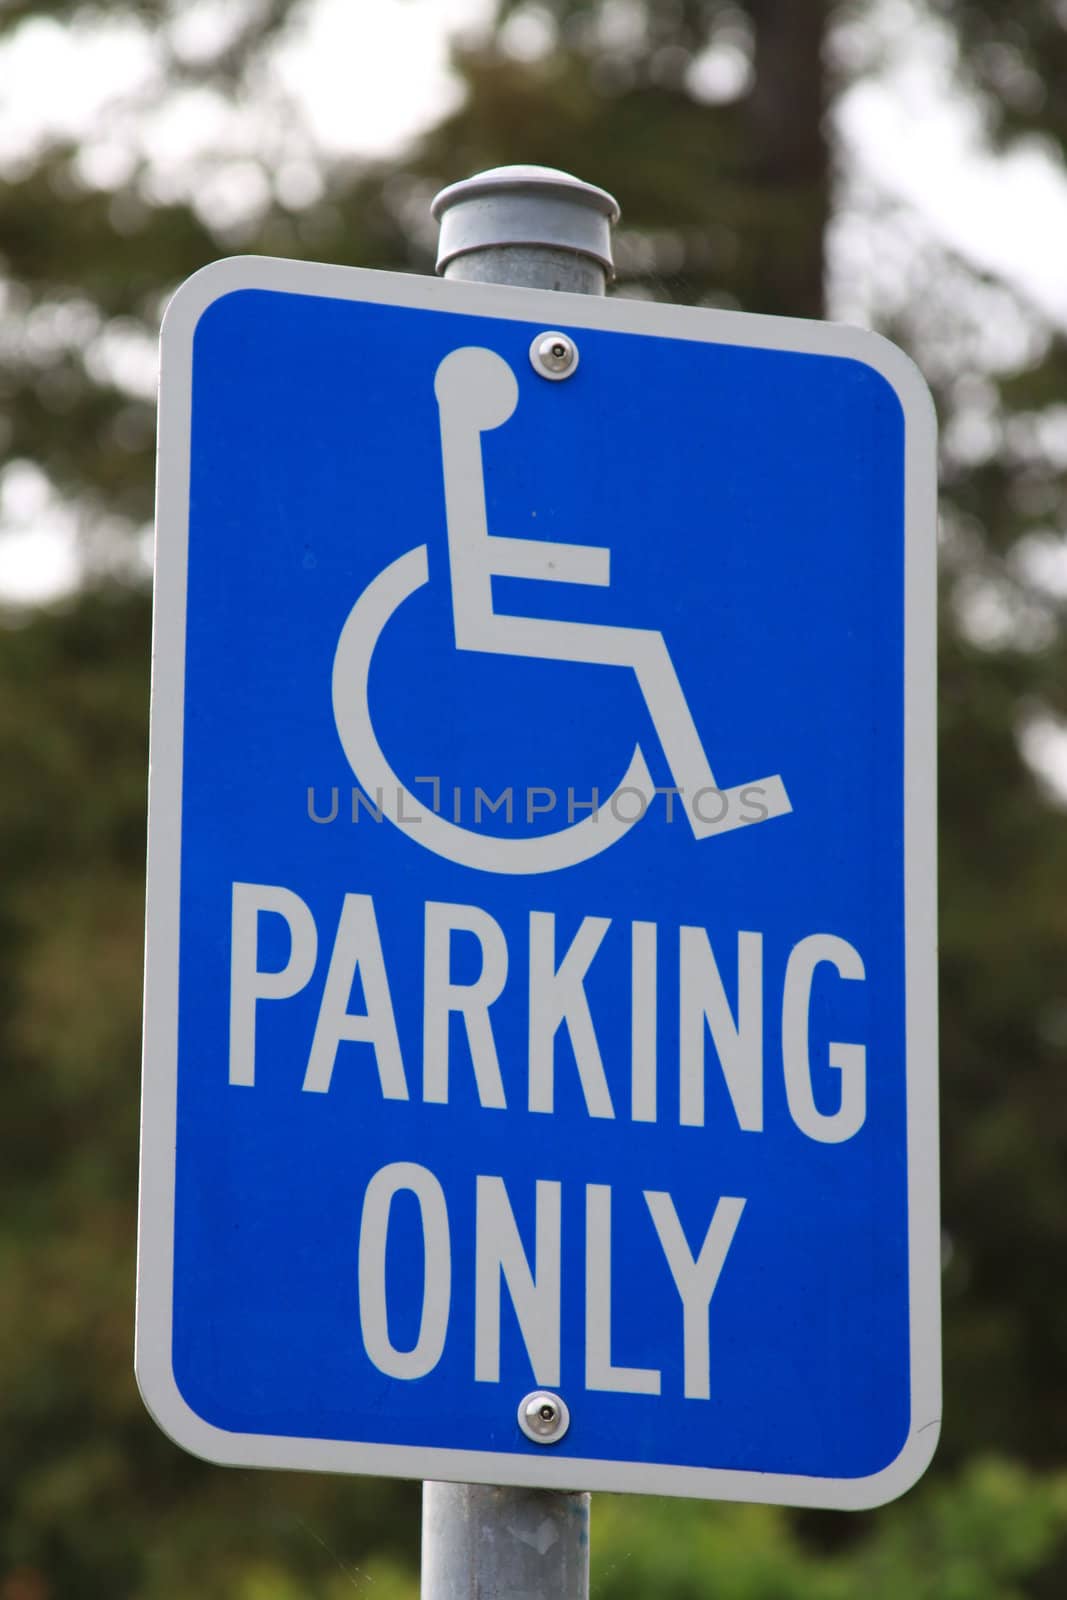 Disabled Parking Only Sign by MichaelFelix